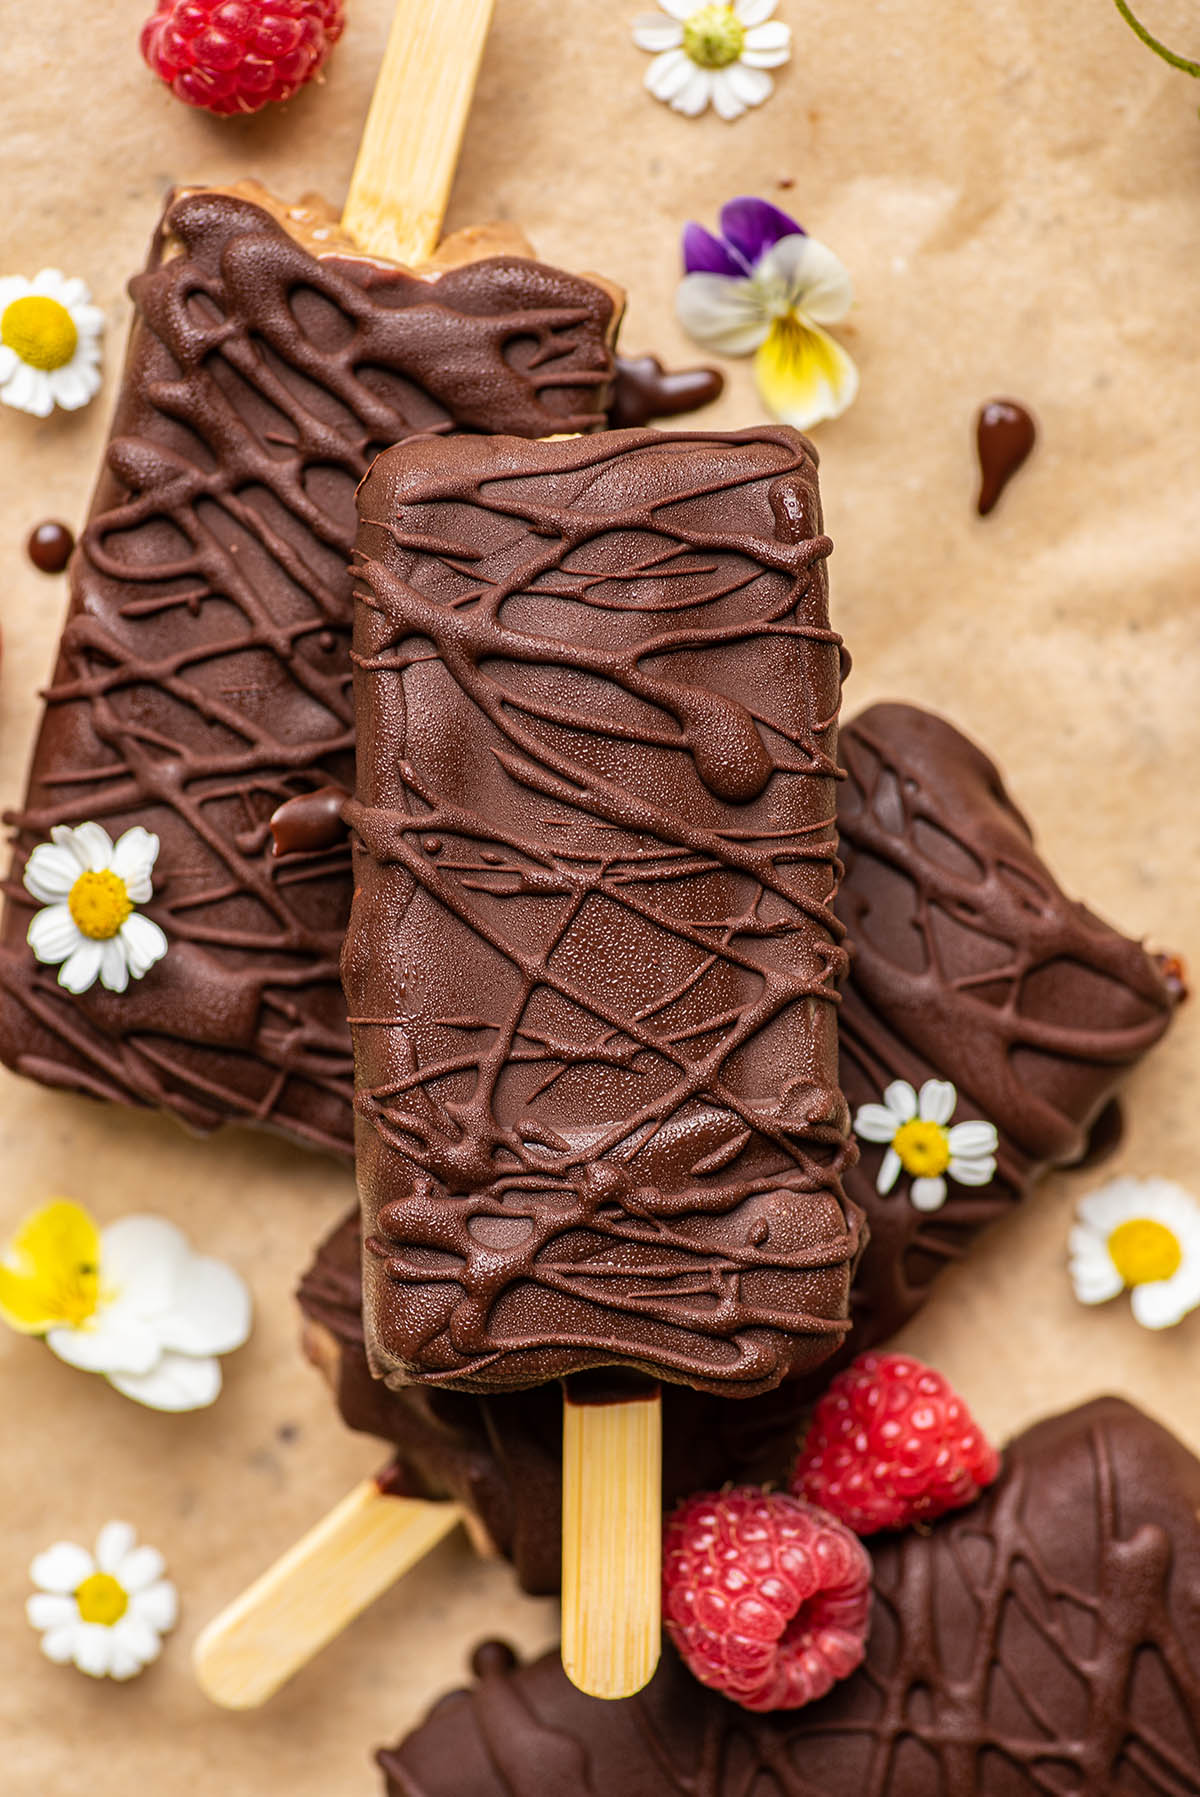 Dark chocolate coated popsicles on parchment paper with flowers and berries.